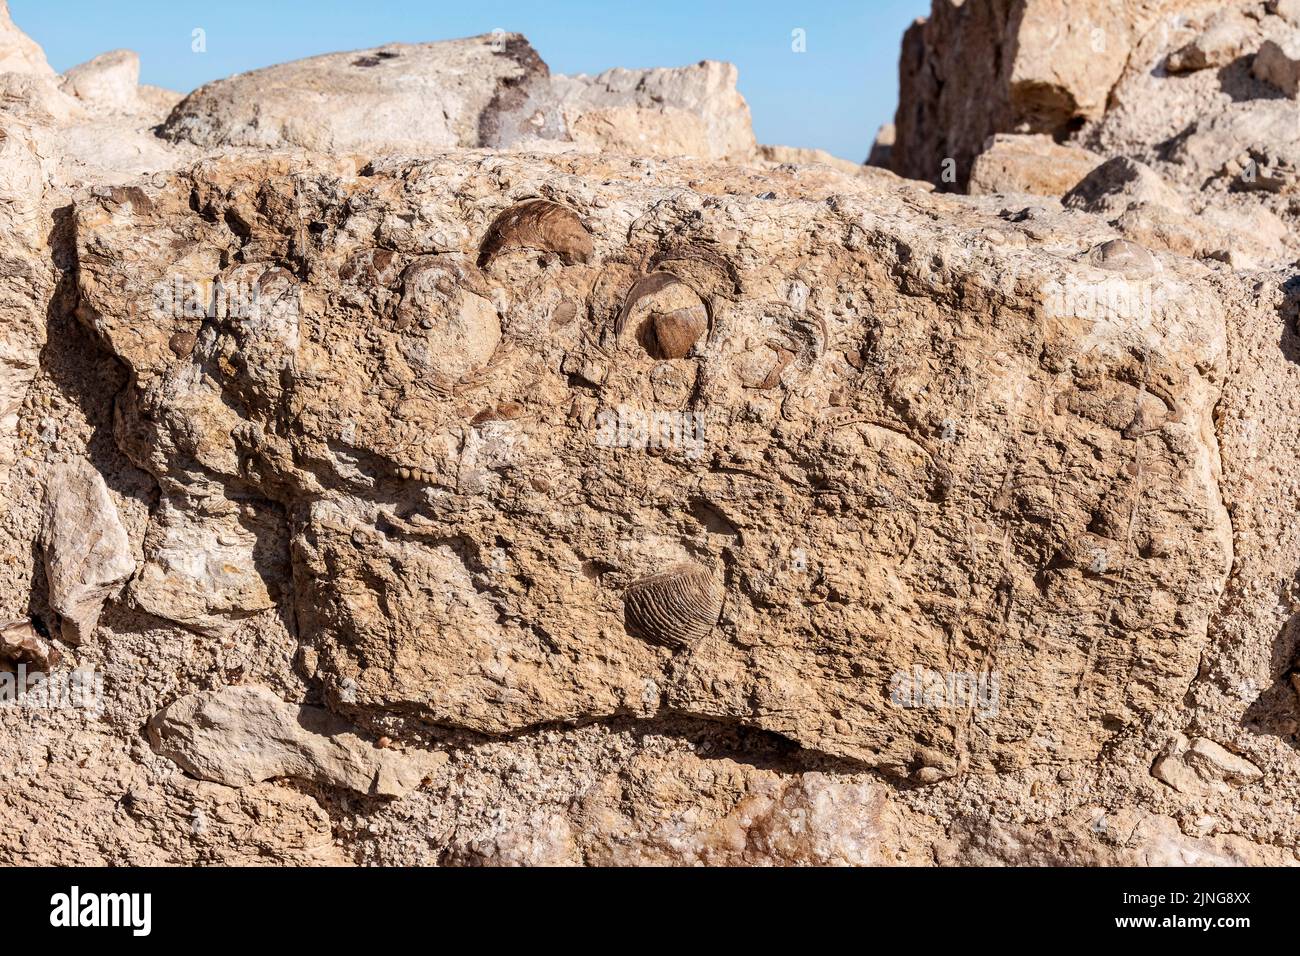 ancient building block full of ammonite fossils iin the Khirbet Qatsra Nabatean Fortress ruins on the Spice Route in the Arava in Israel Stock Photo